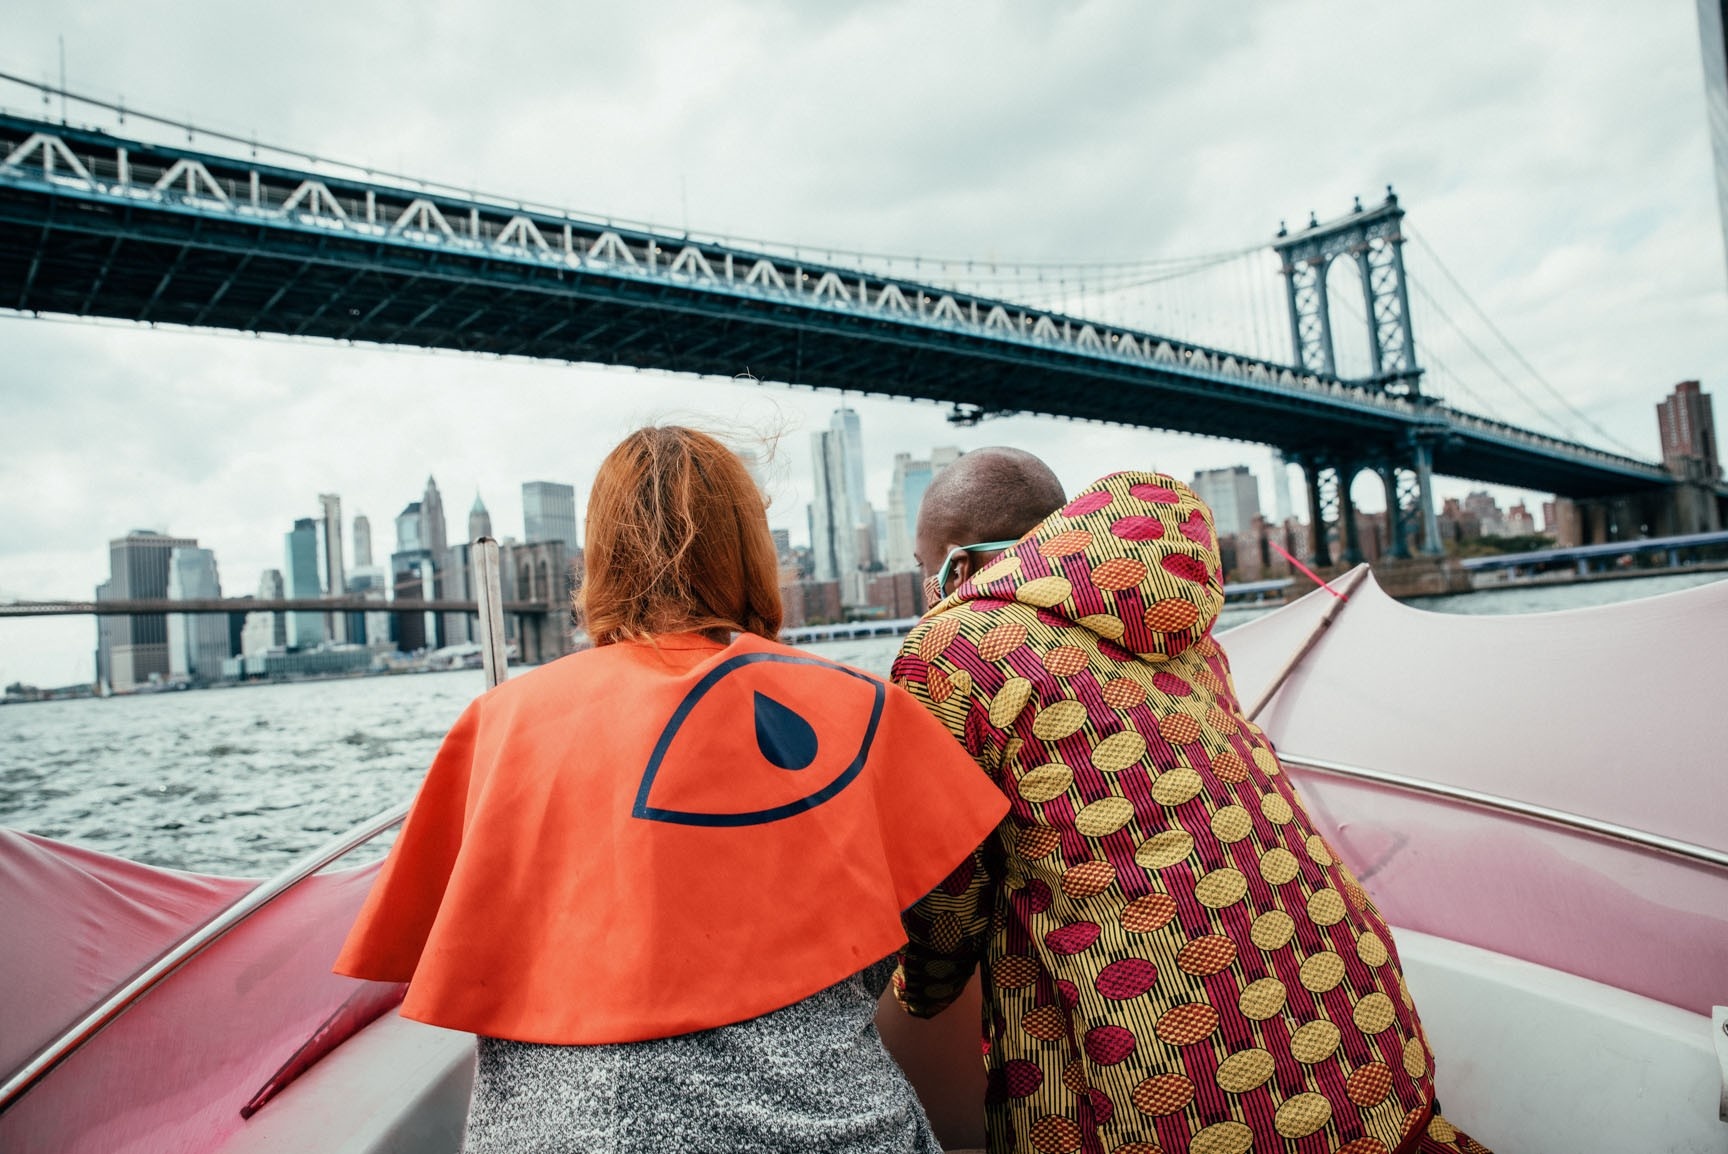 A photograph of two people, backs facing the camera, on a boat overlooking the Brooklyn Bridge. The person on the left wears an orange cape with the Wide Awakes eye.